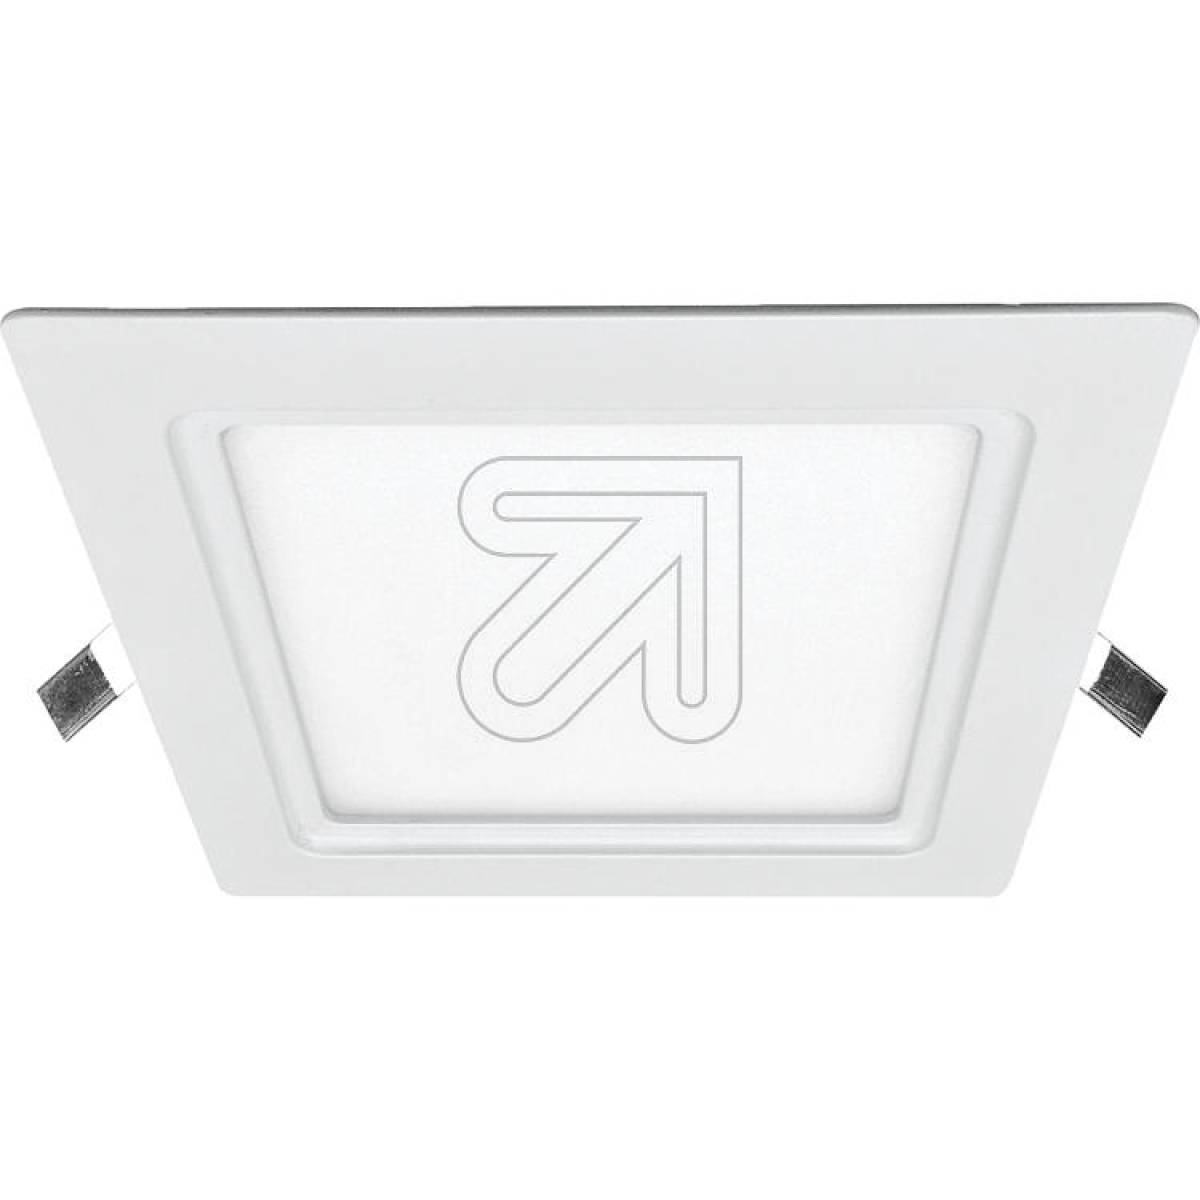 mlightLED built-in and add-on panel white IP44 4000K 6W square 81-3144 dimmableArticle-No: 677815